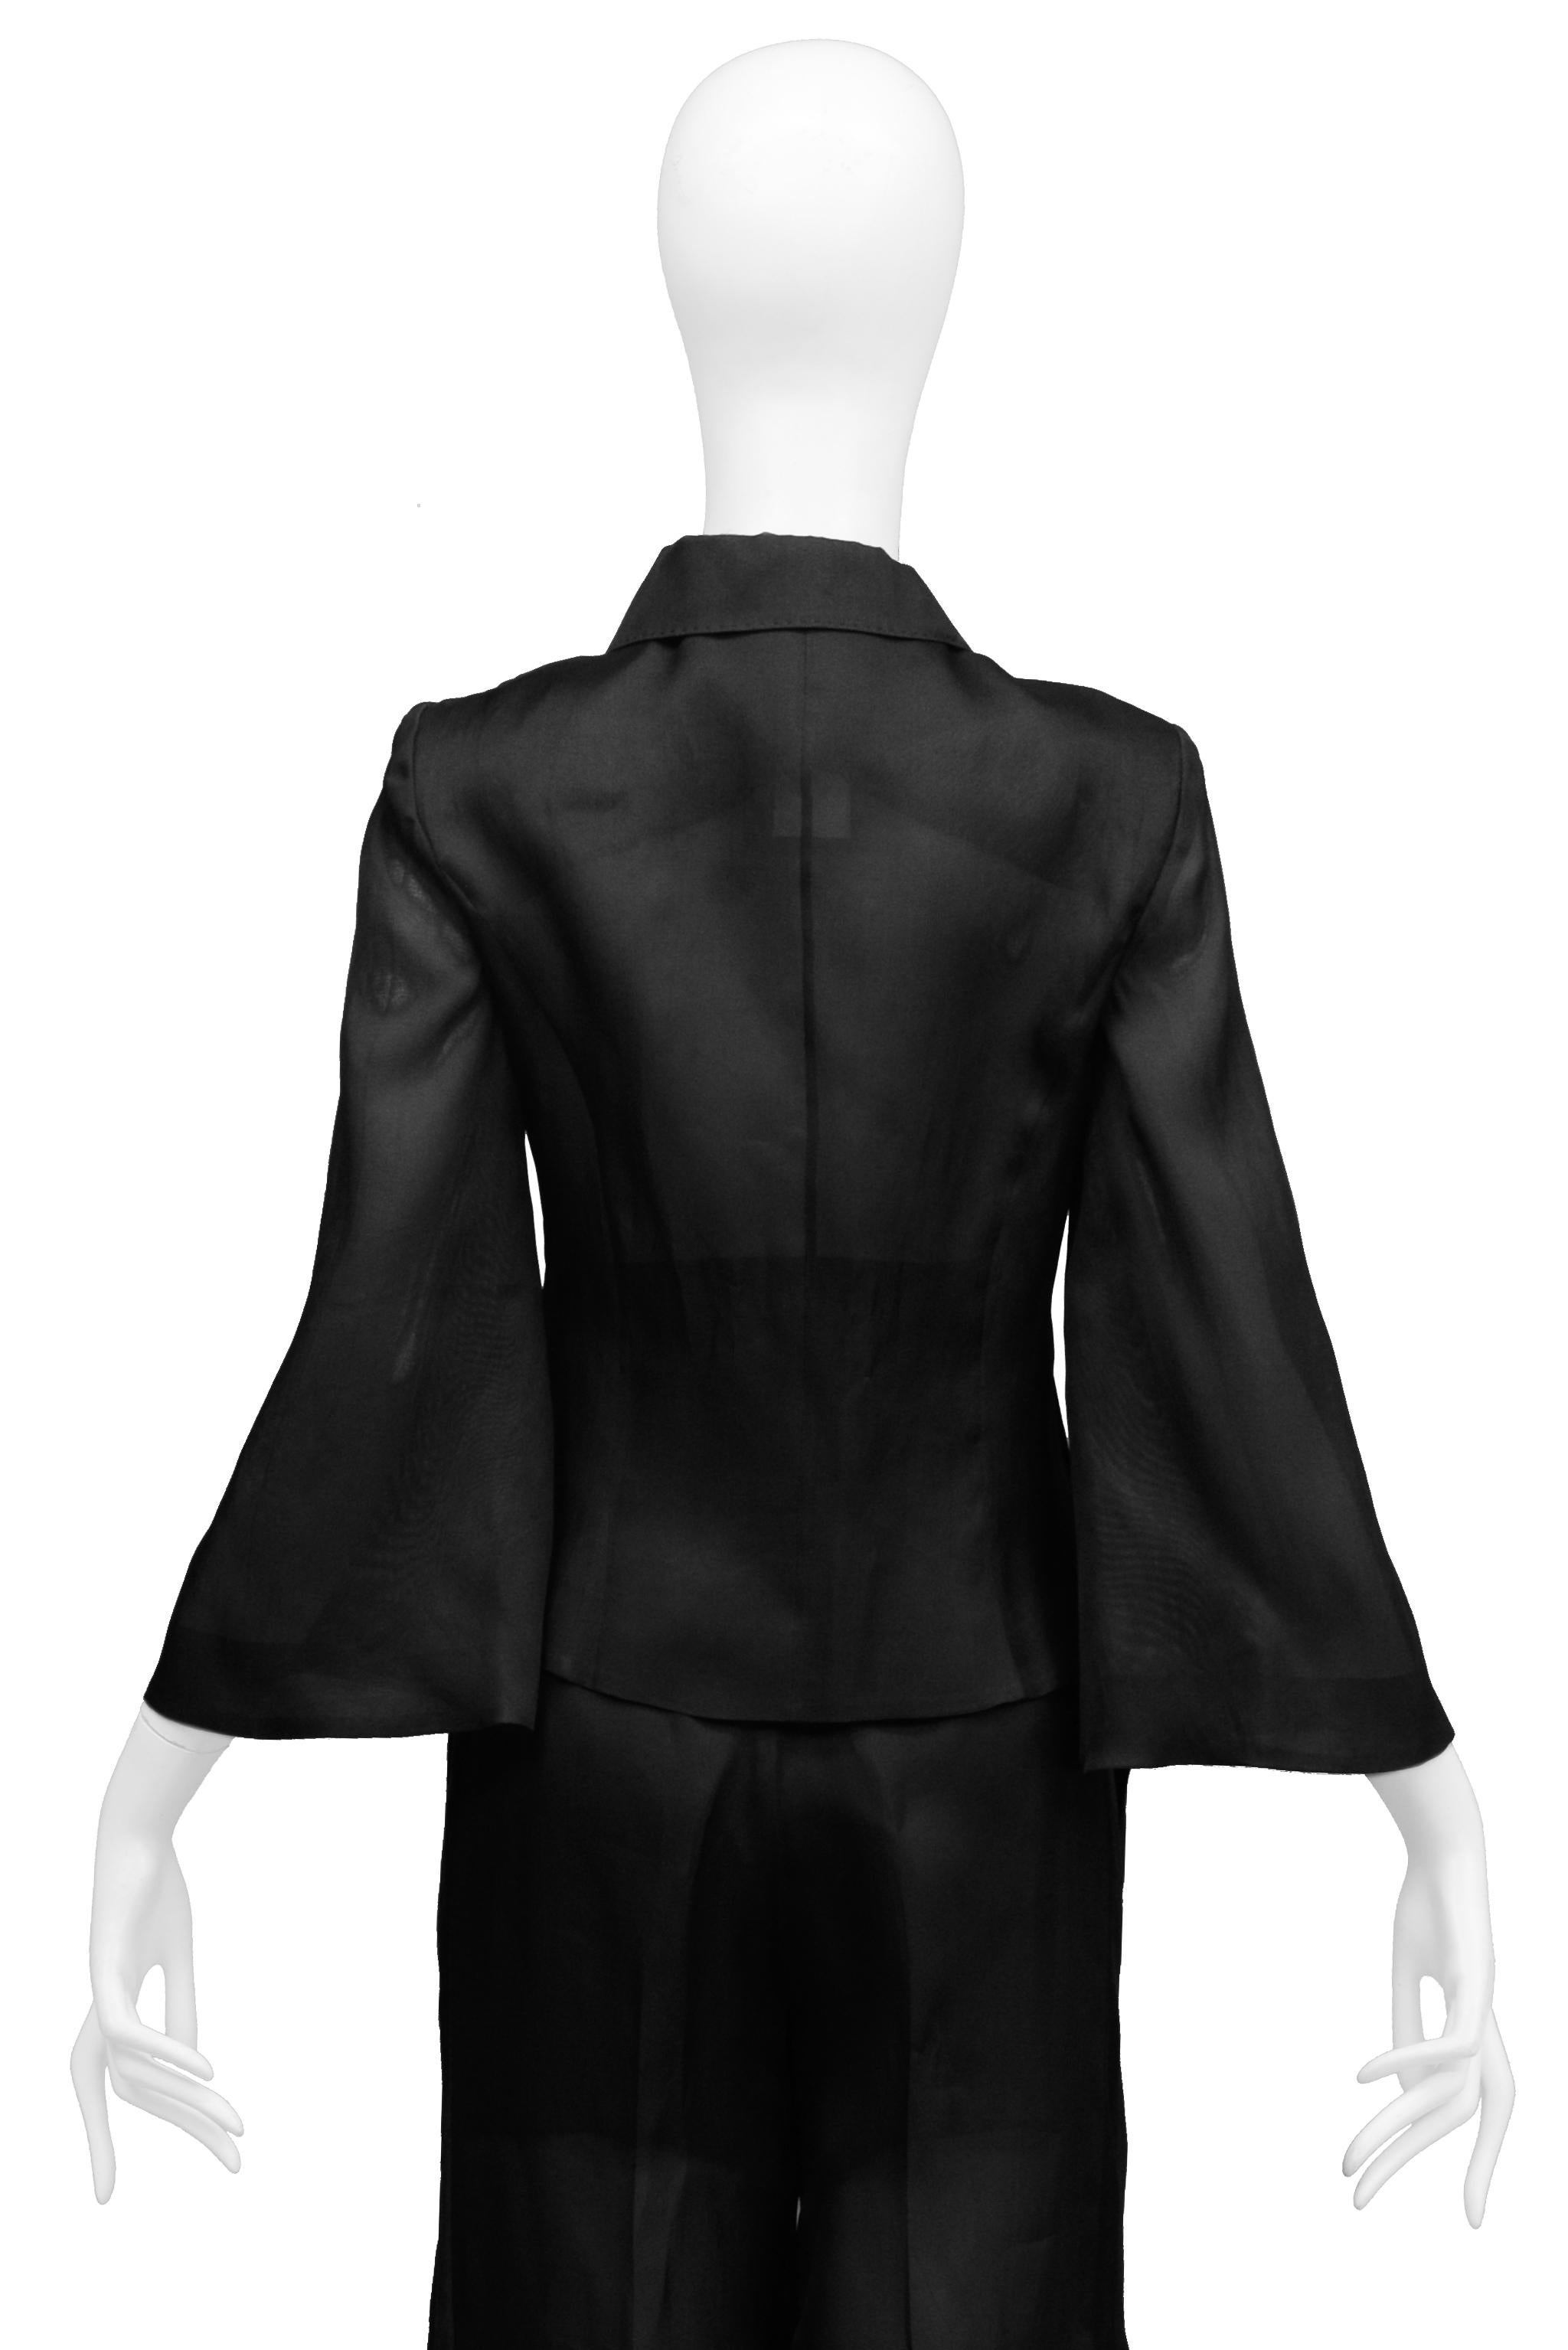 Gianfranco Ferre Black Sheer Pantsuit With Bell Sleeves For Sale 2